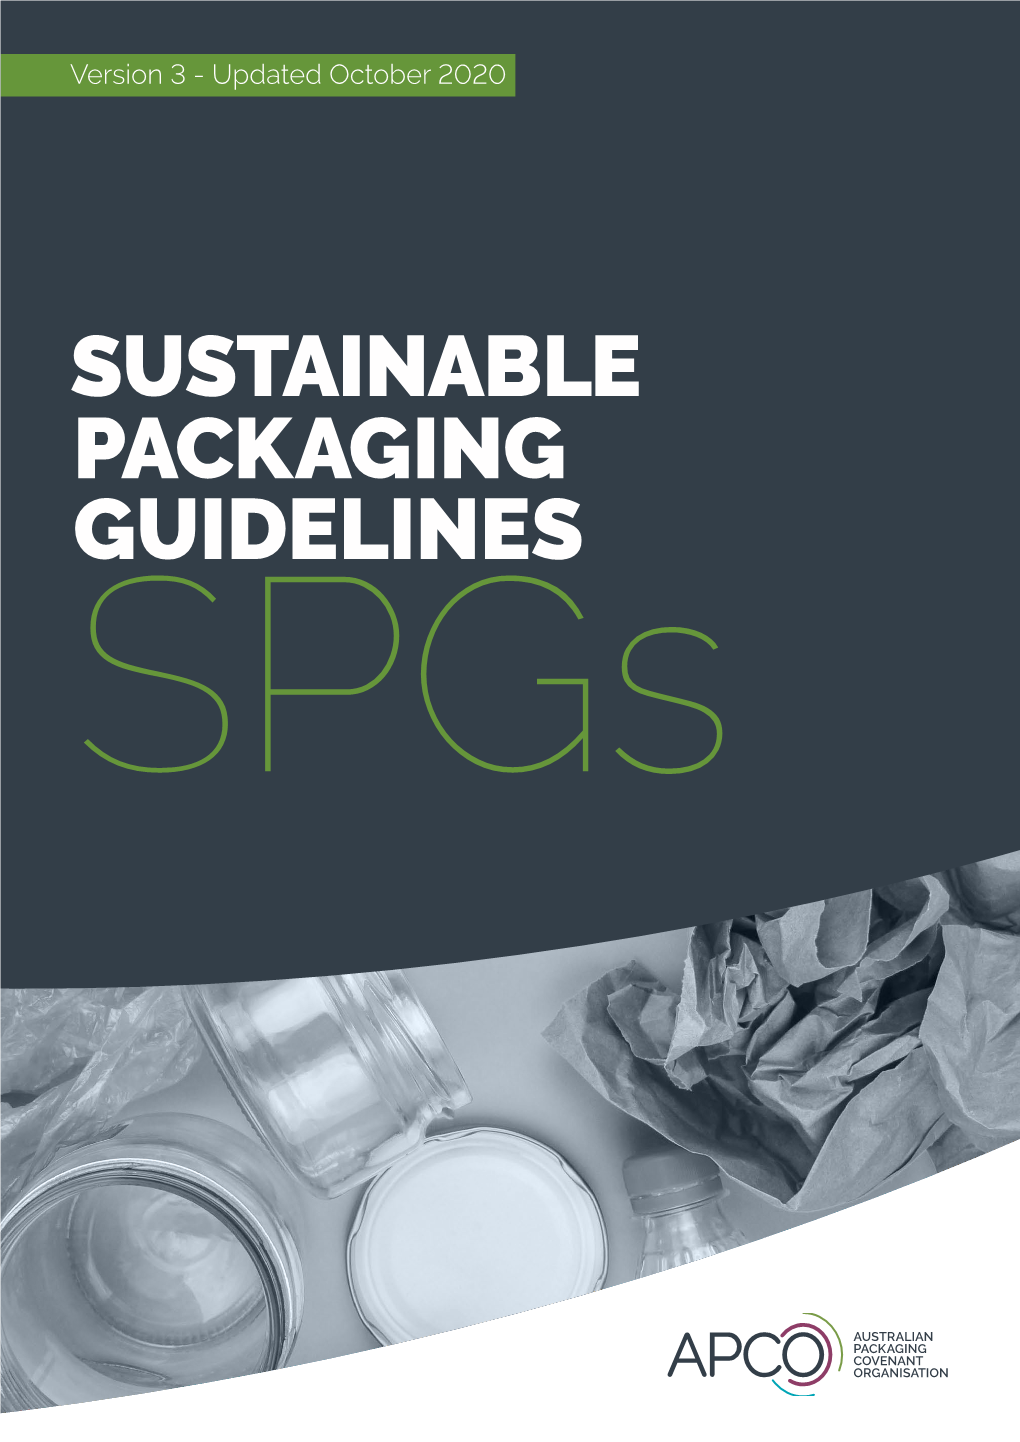 SUSTAINABLE PACKAGING GUIDELINES Version 3 - Updated October 2020